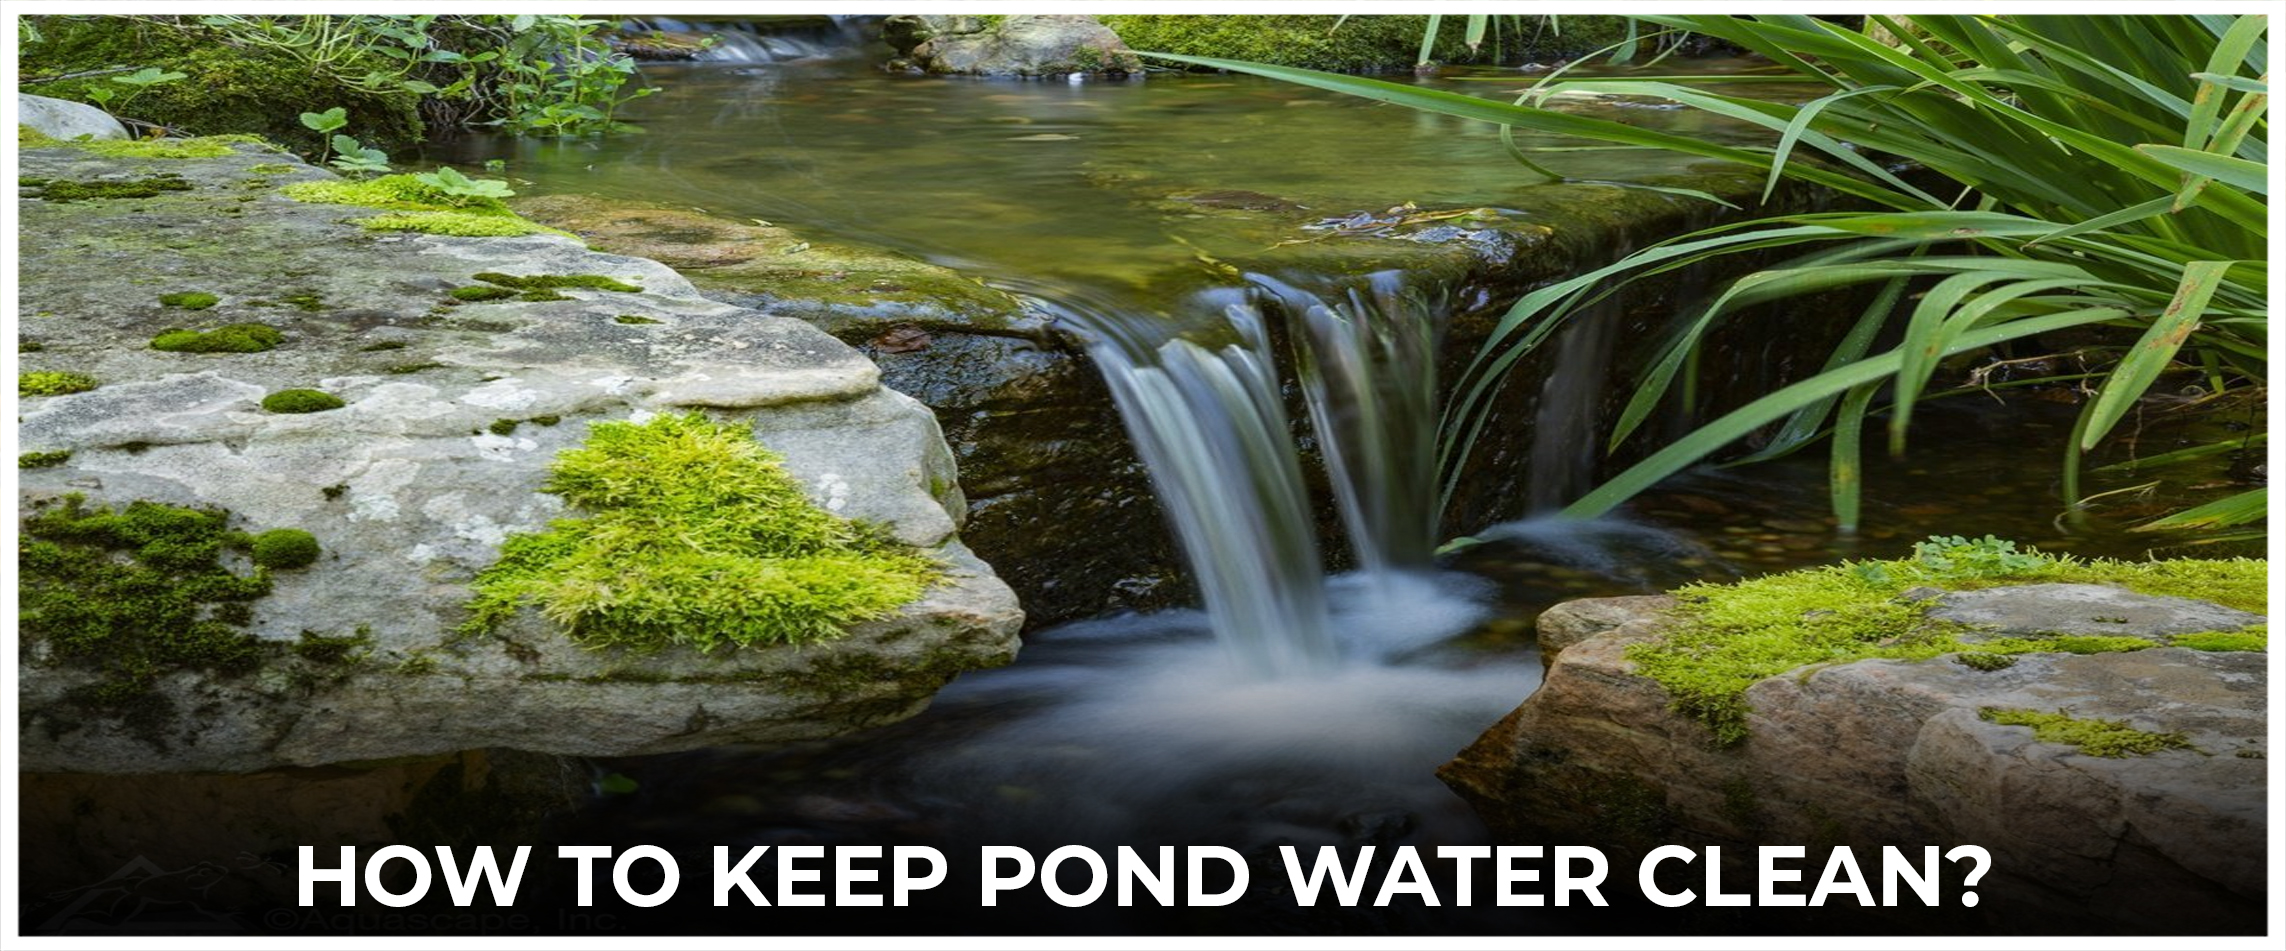  How To Keep Pond Water Clean